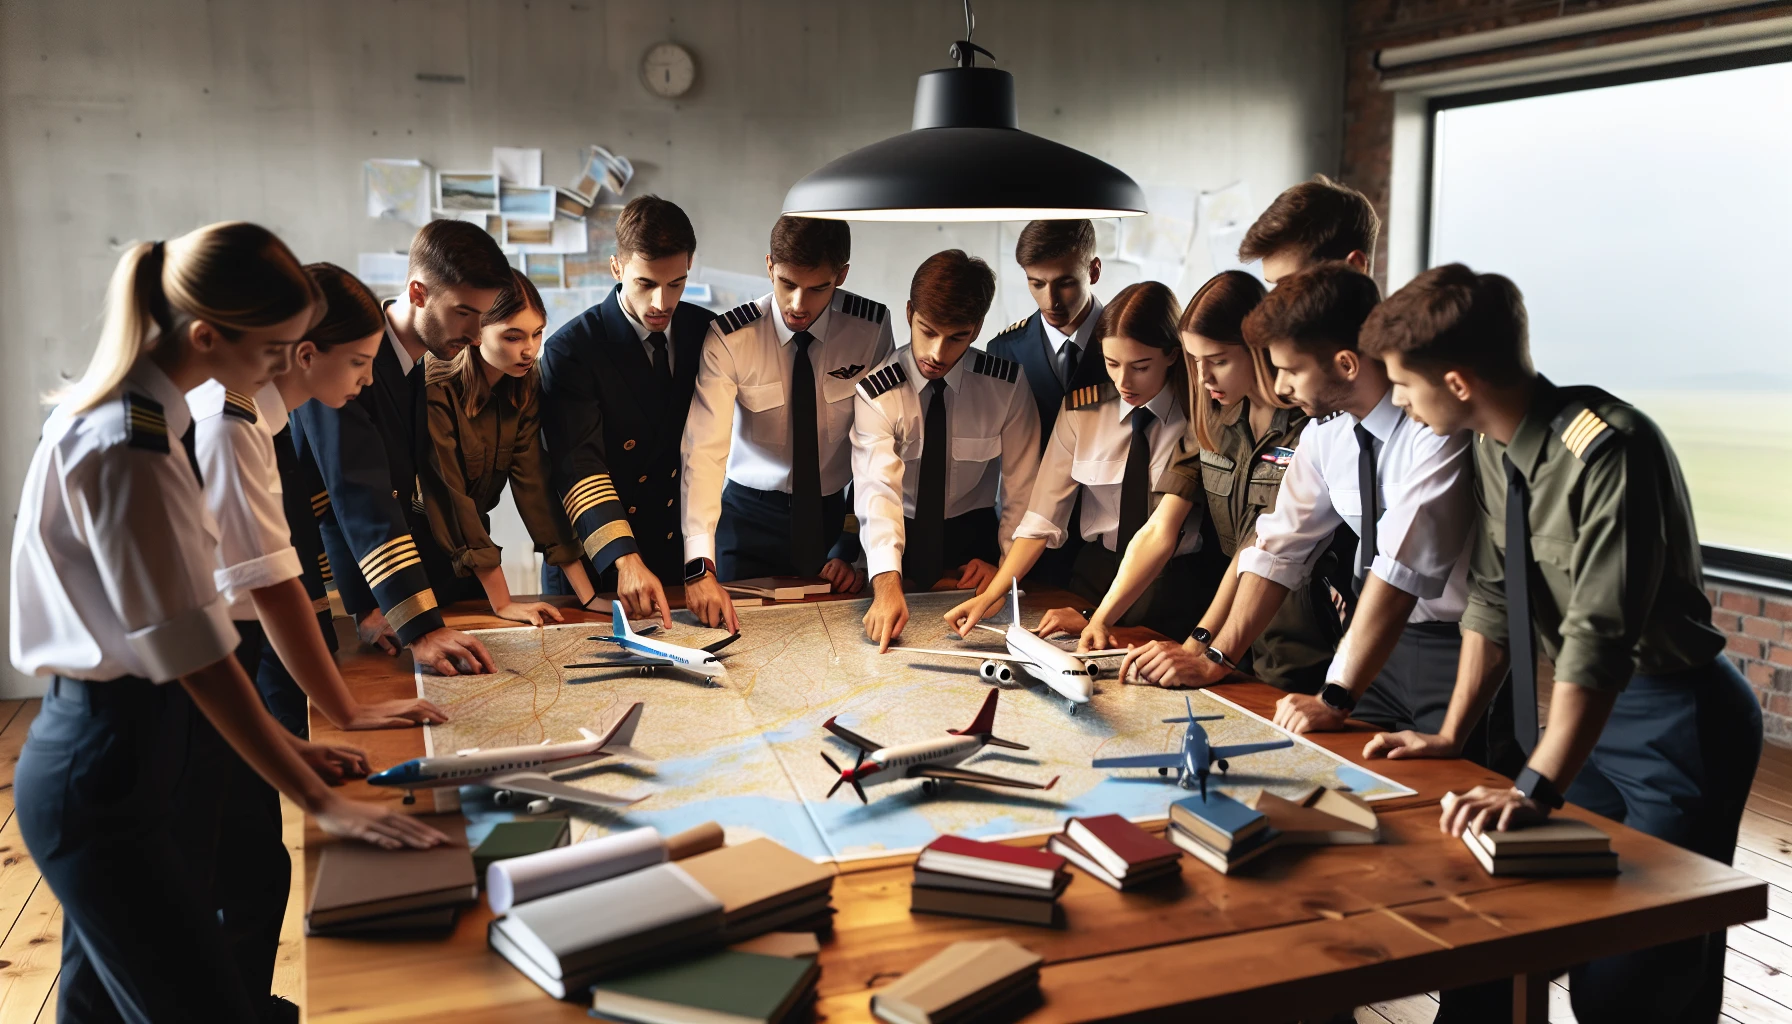 A group of student pilots studying together in a classroom